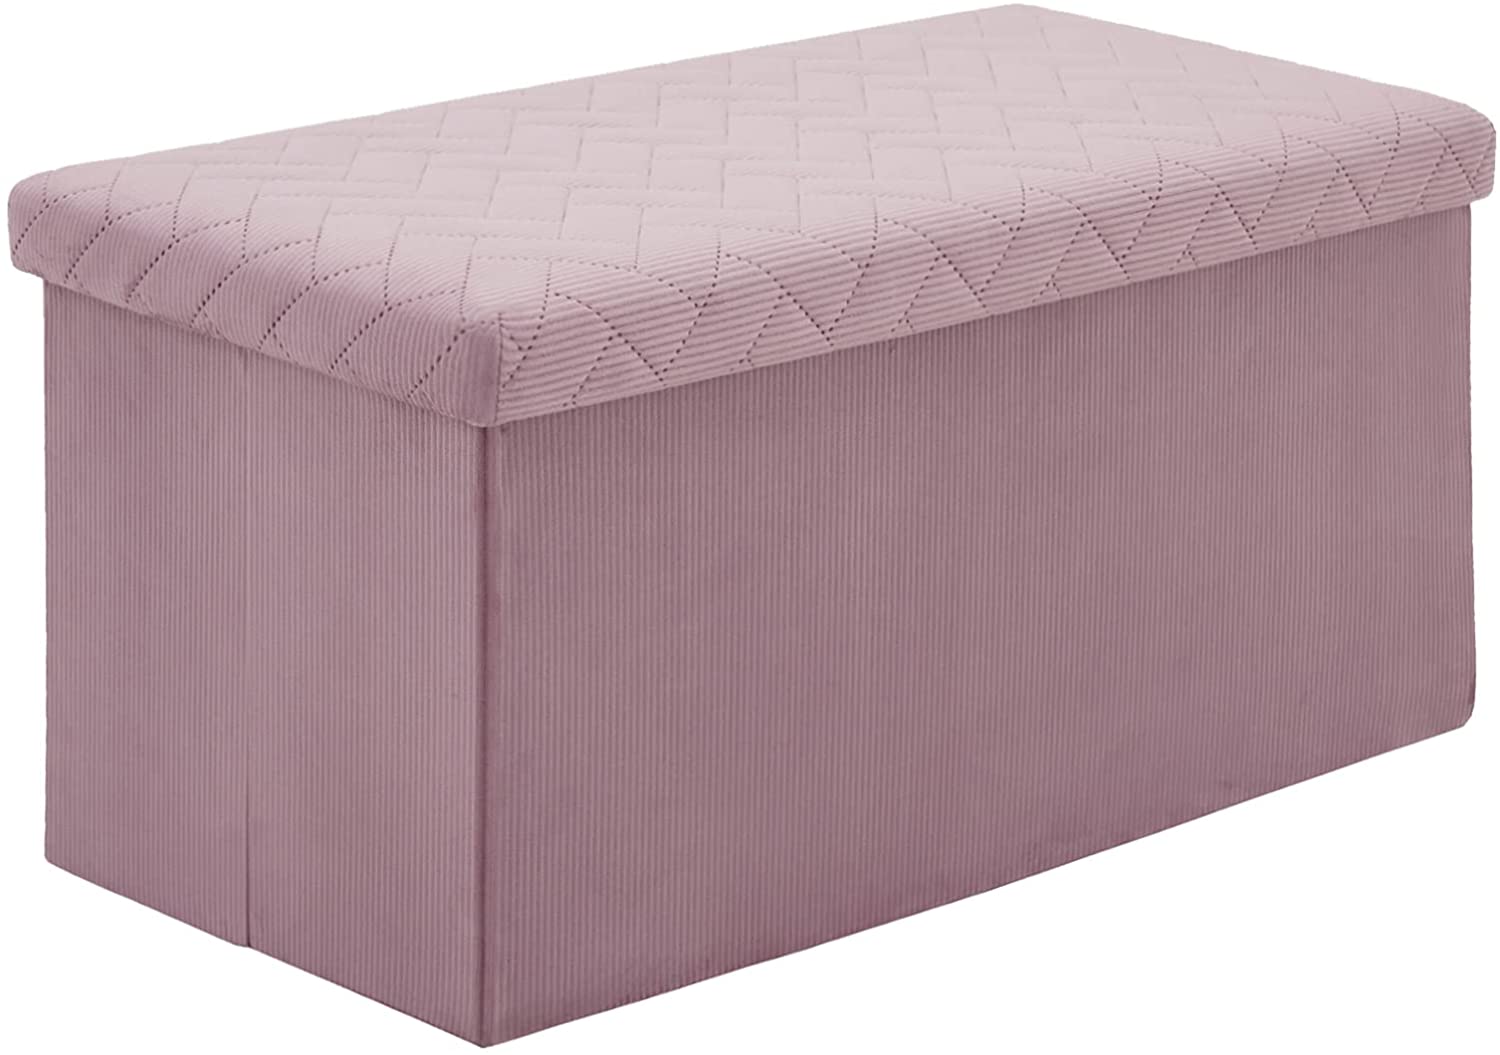 PINPLUS 30.1" Folding Pink Velvet  Storage Ottoman Bench with Lid for Living Room, Long Shoes Bench, Toys Chest Box, Foot Rest Stool Seat - image 1 of 7